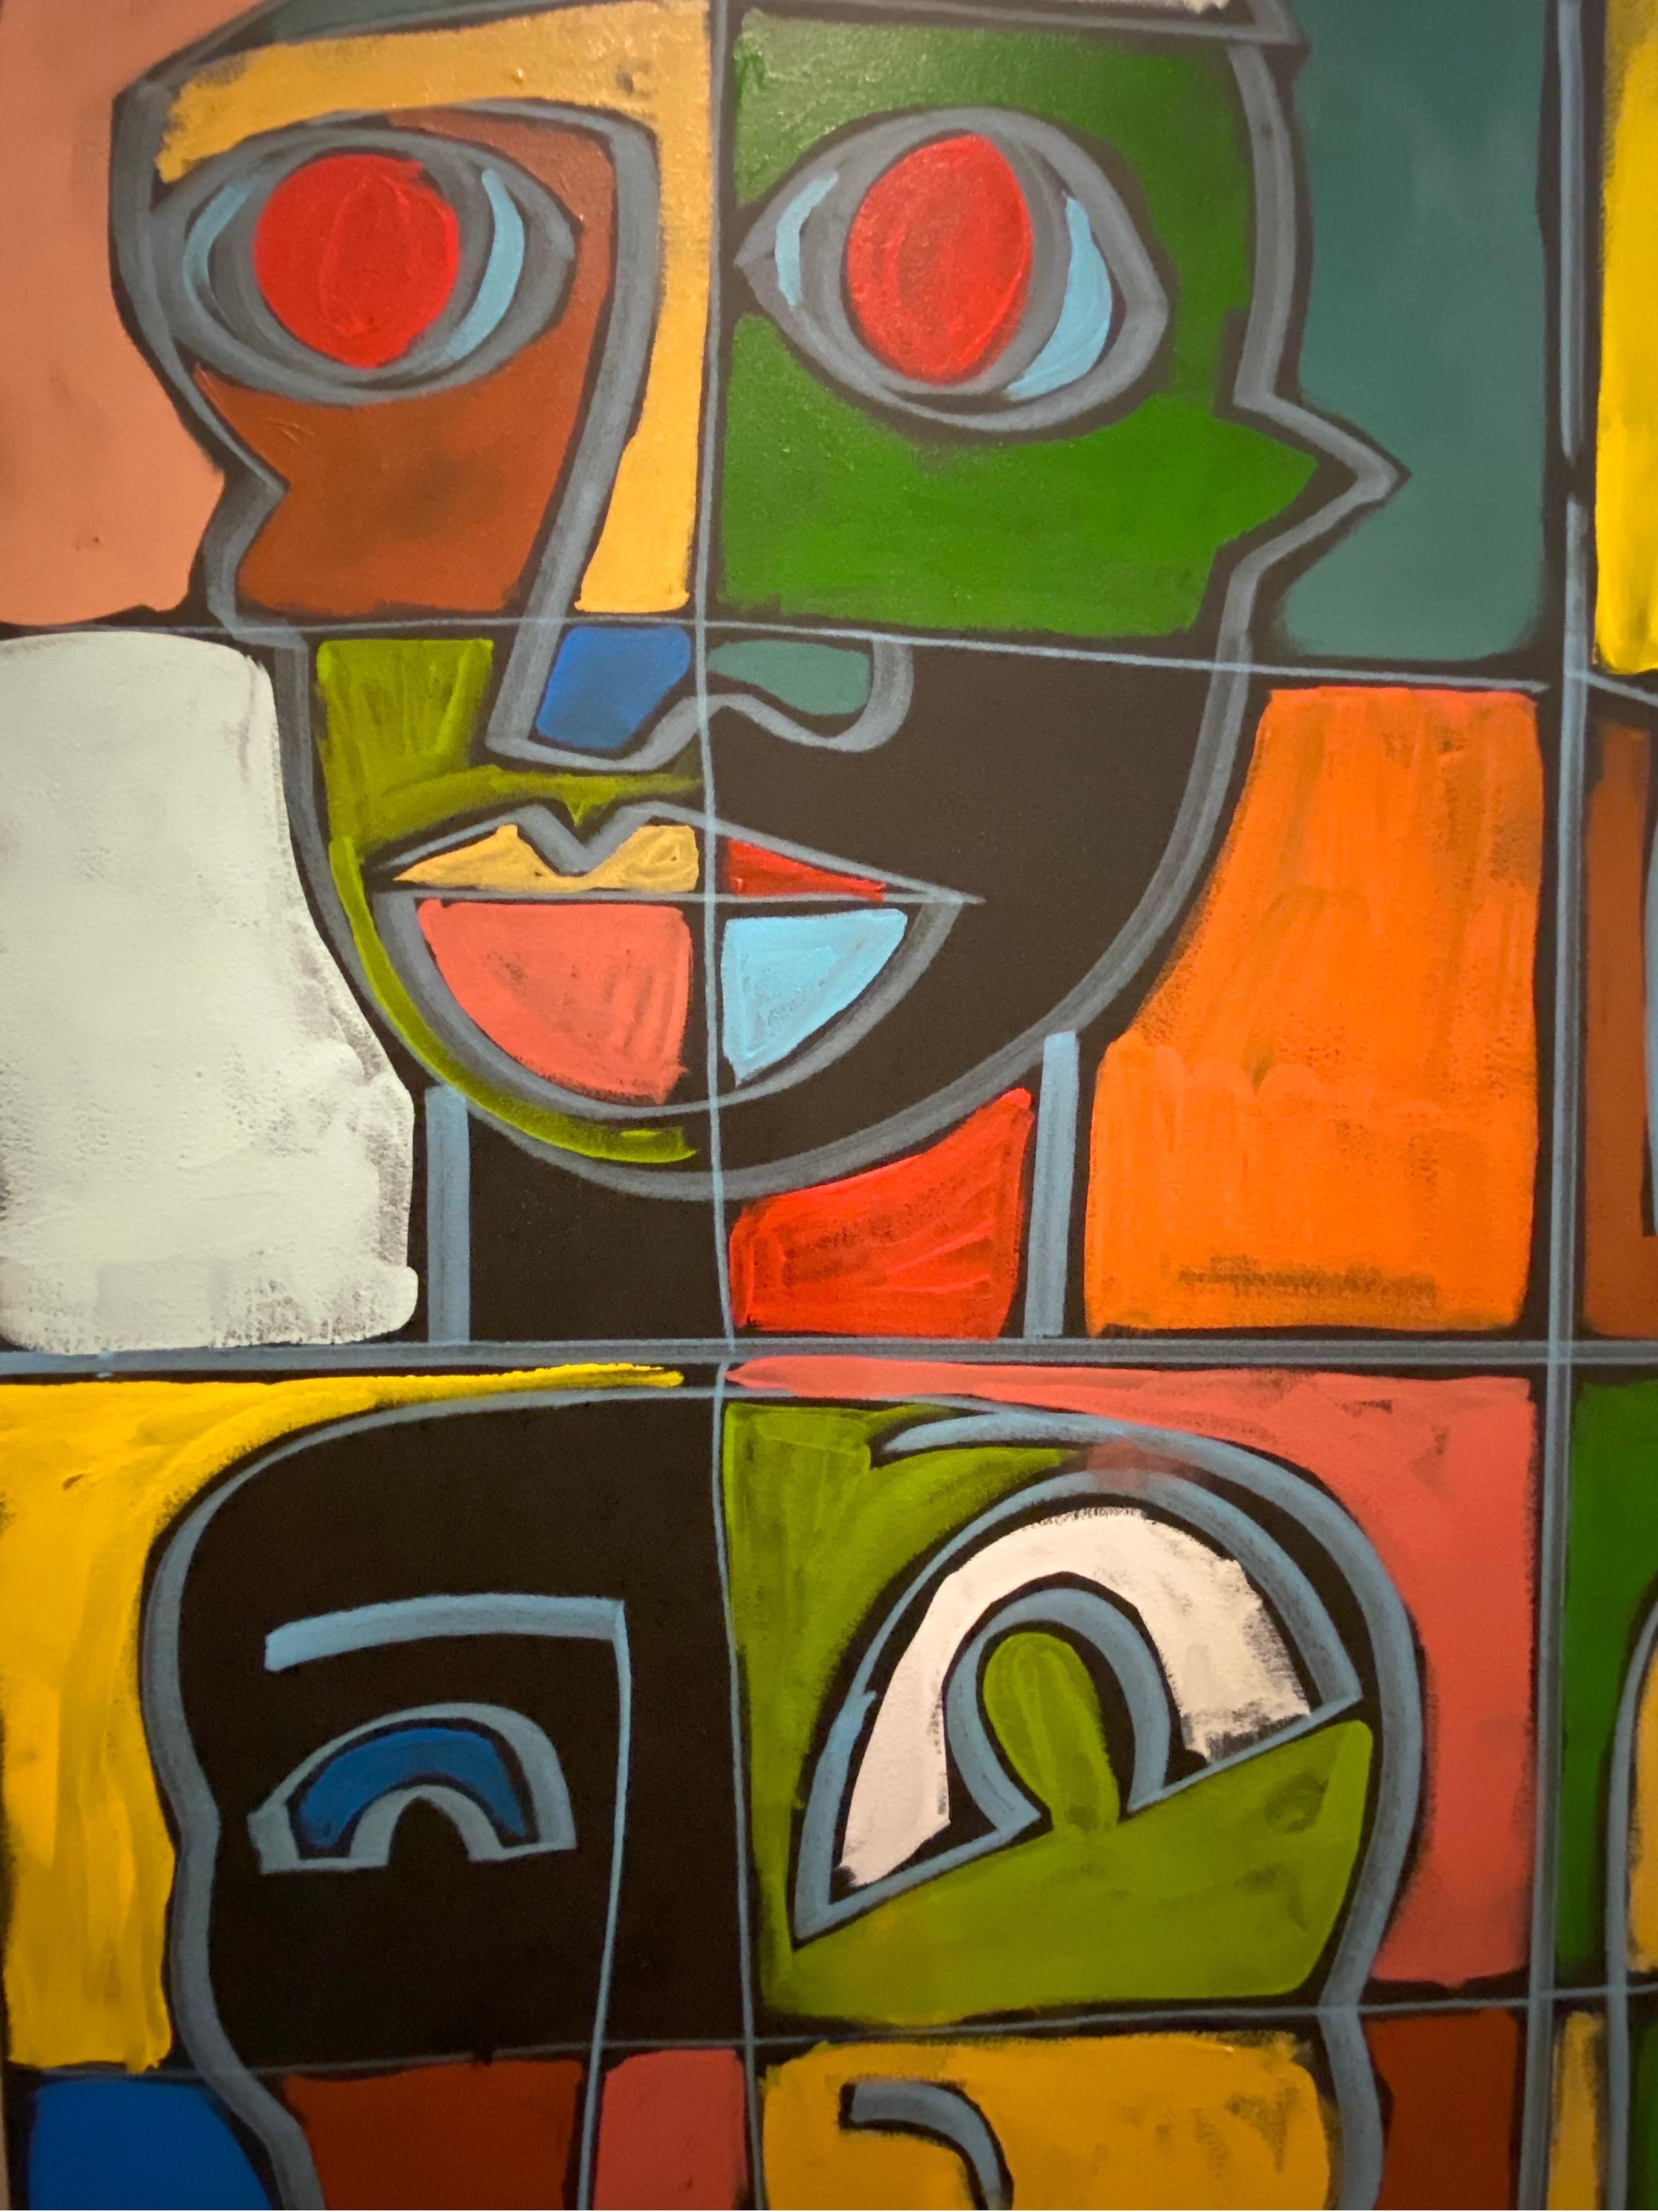 Impressive large unframed acrylic on canvas by Karl James Lubbering (b. 1969) is of a cubist style of two-dimensional faces in vibrant matte colors. Karl comes from a family of prominent Texas artists spanning several decades, embracing many styles,